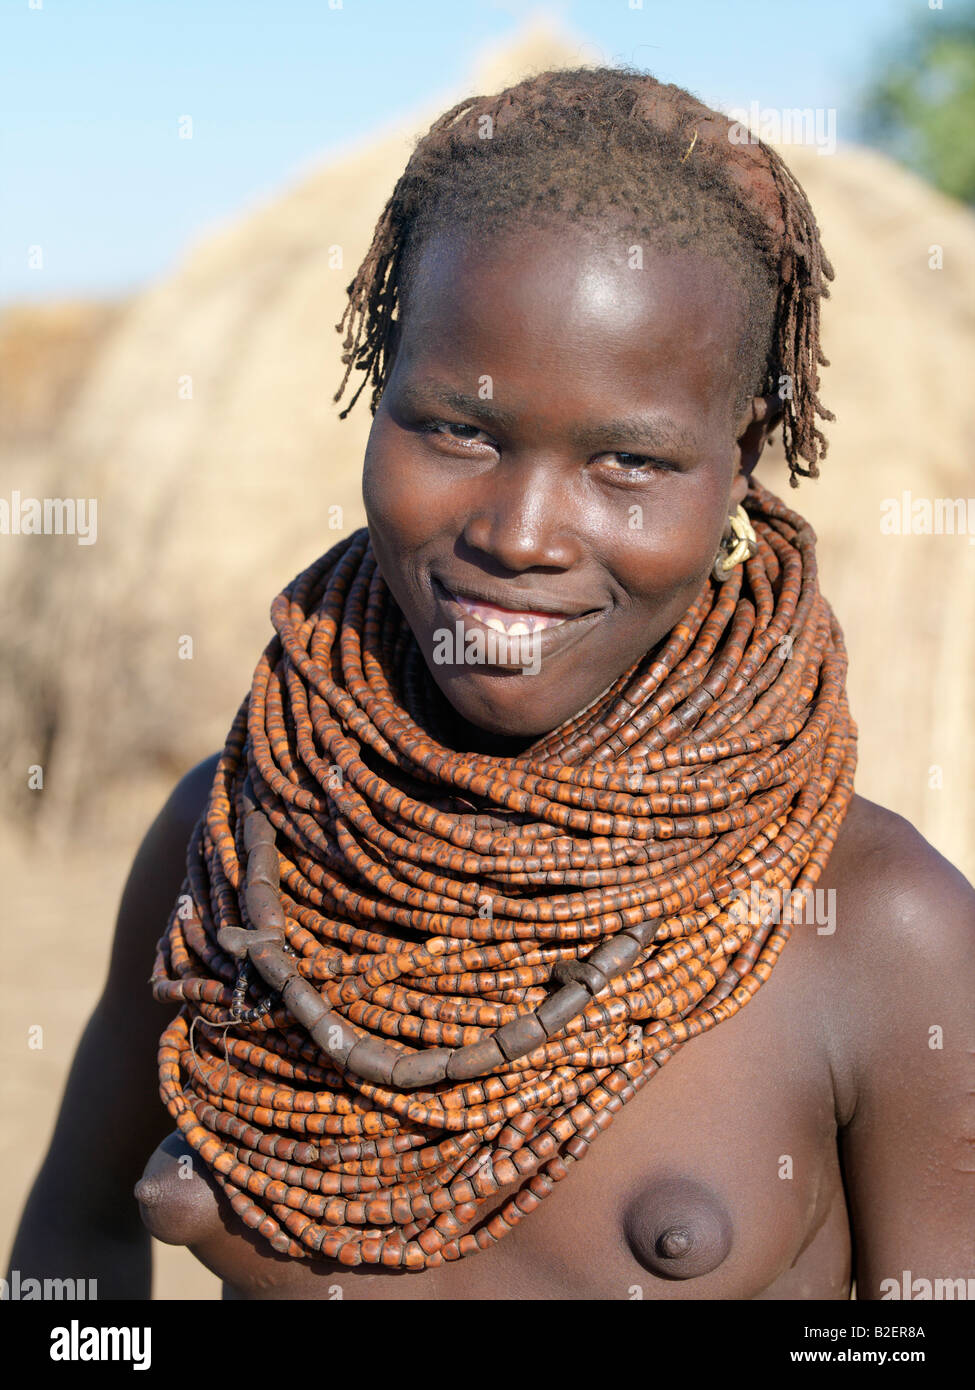 A Nyag'atom girl with a large necklace, the beads of which are made of wood.The Nyag'atom are one of the largest tribes. Stock Photo